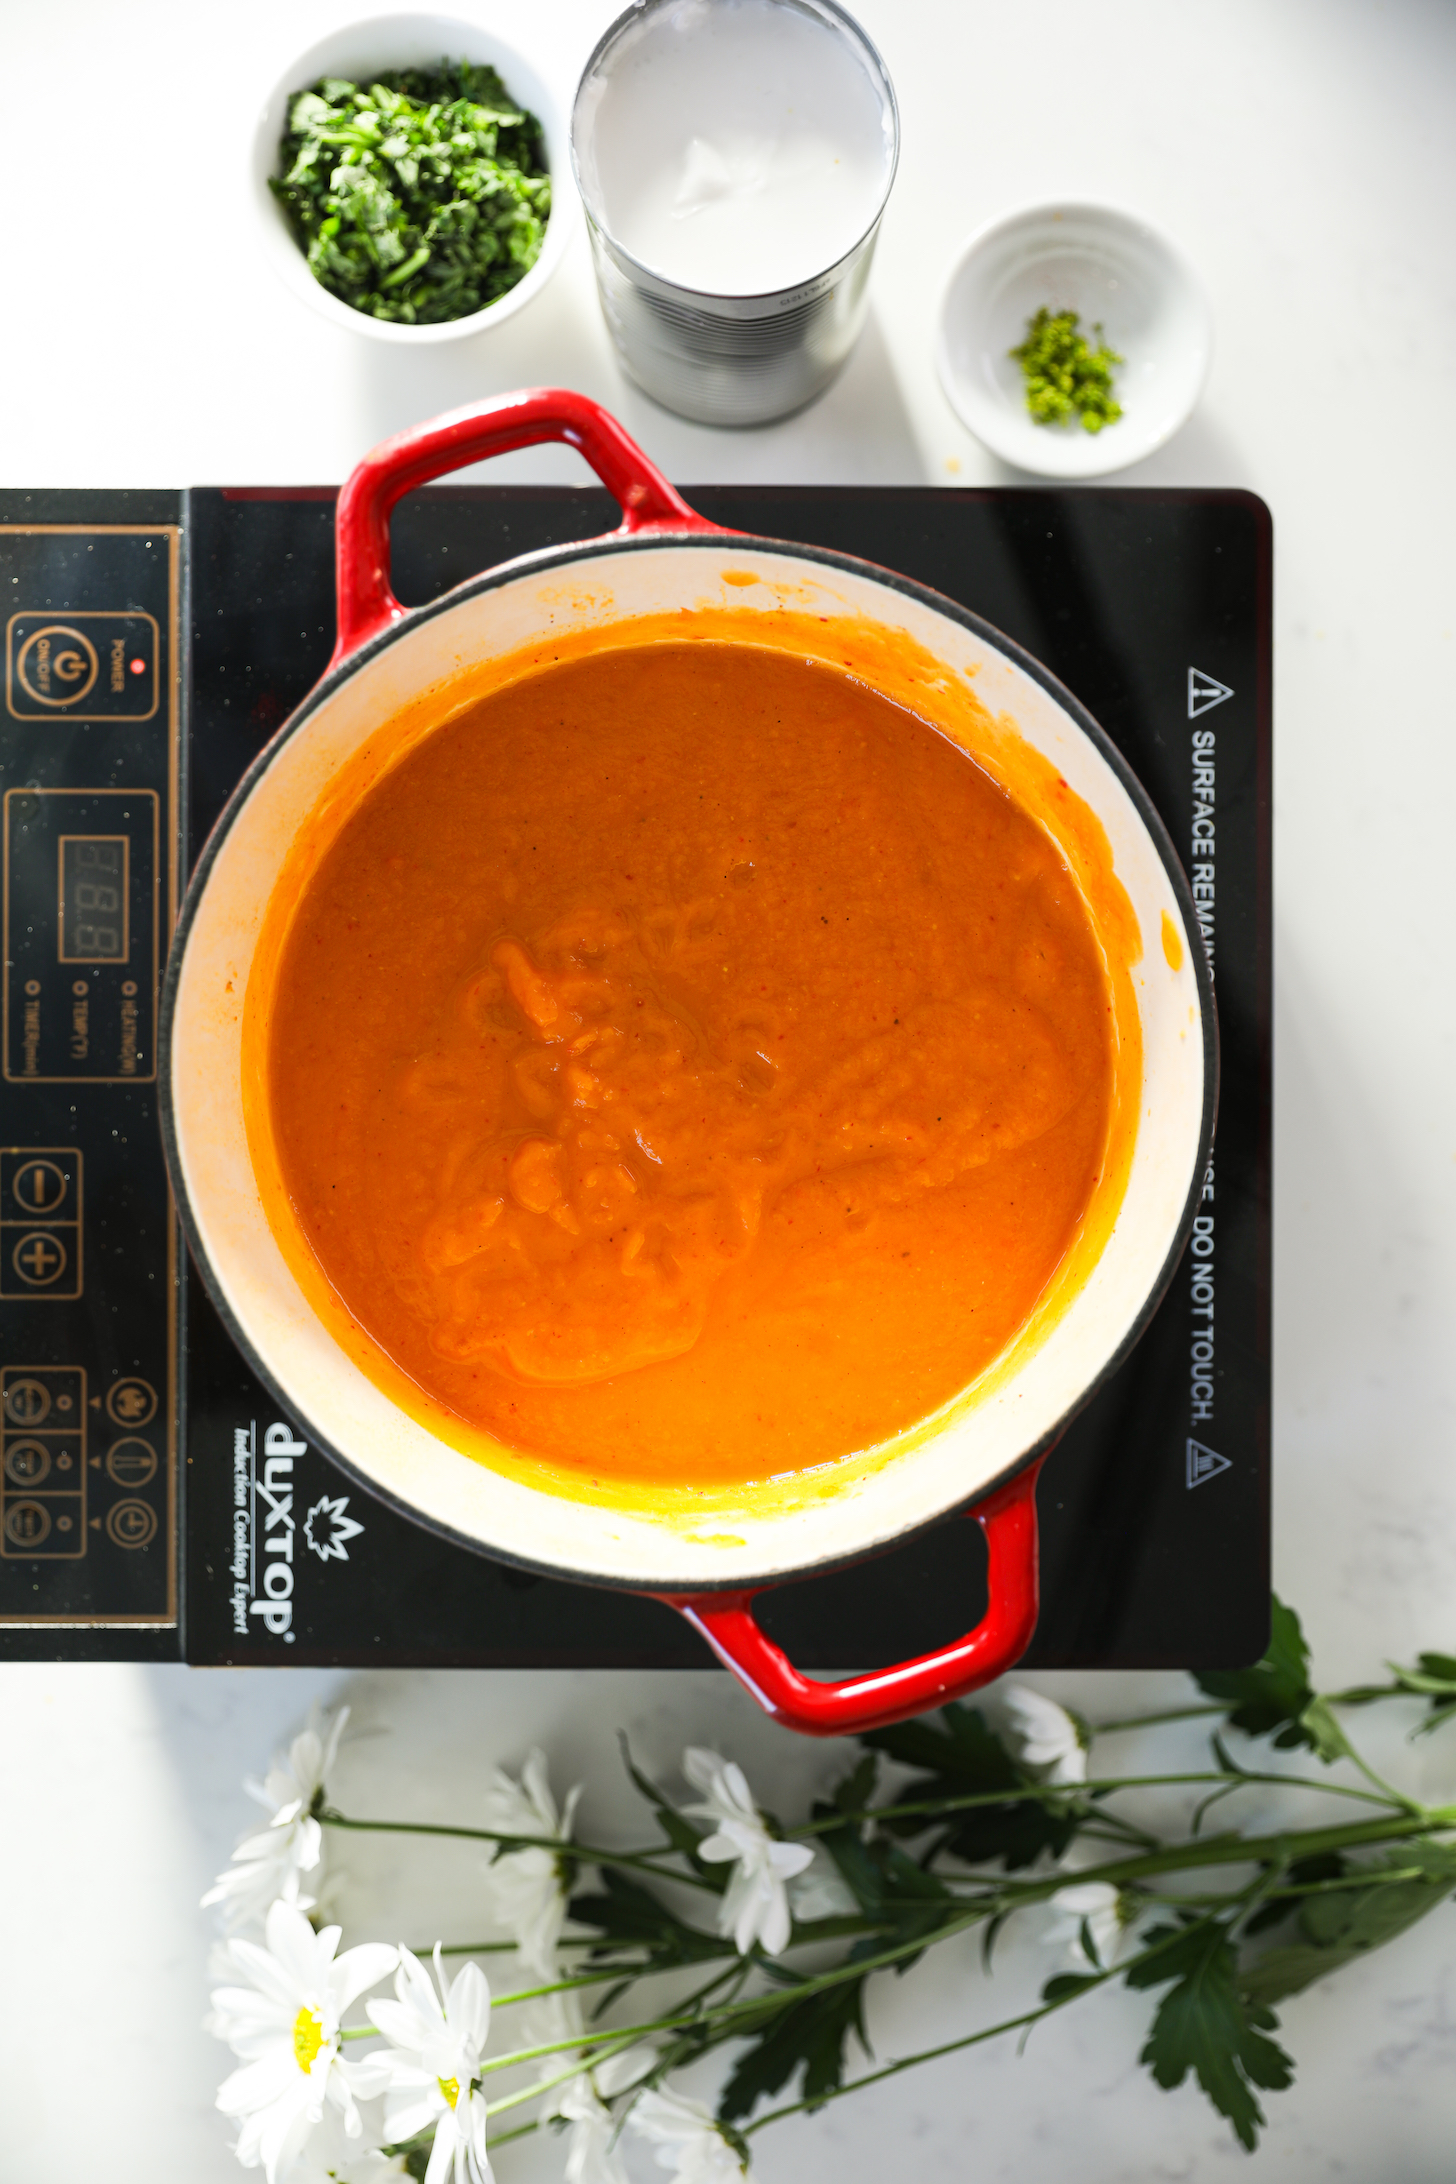 Top-down view of a pureed soup in a cooking pot on a mobile cooktop, surrounded by ramekins and a can of ingredients.